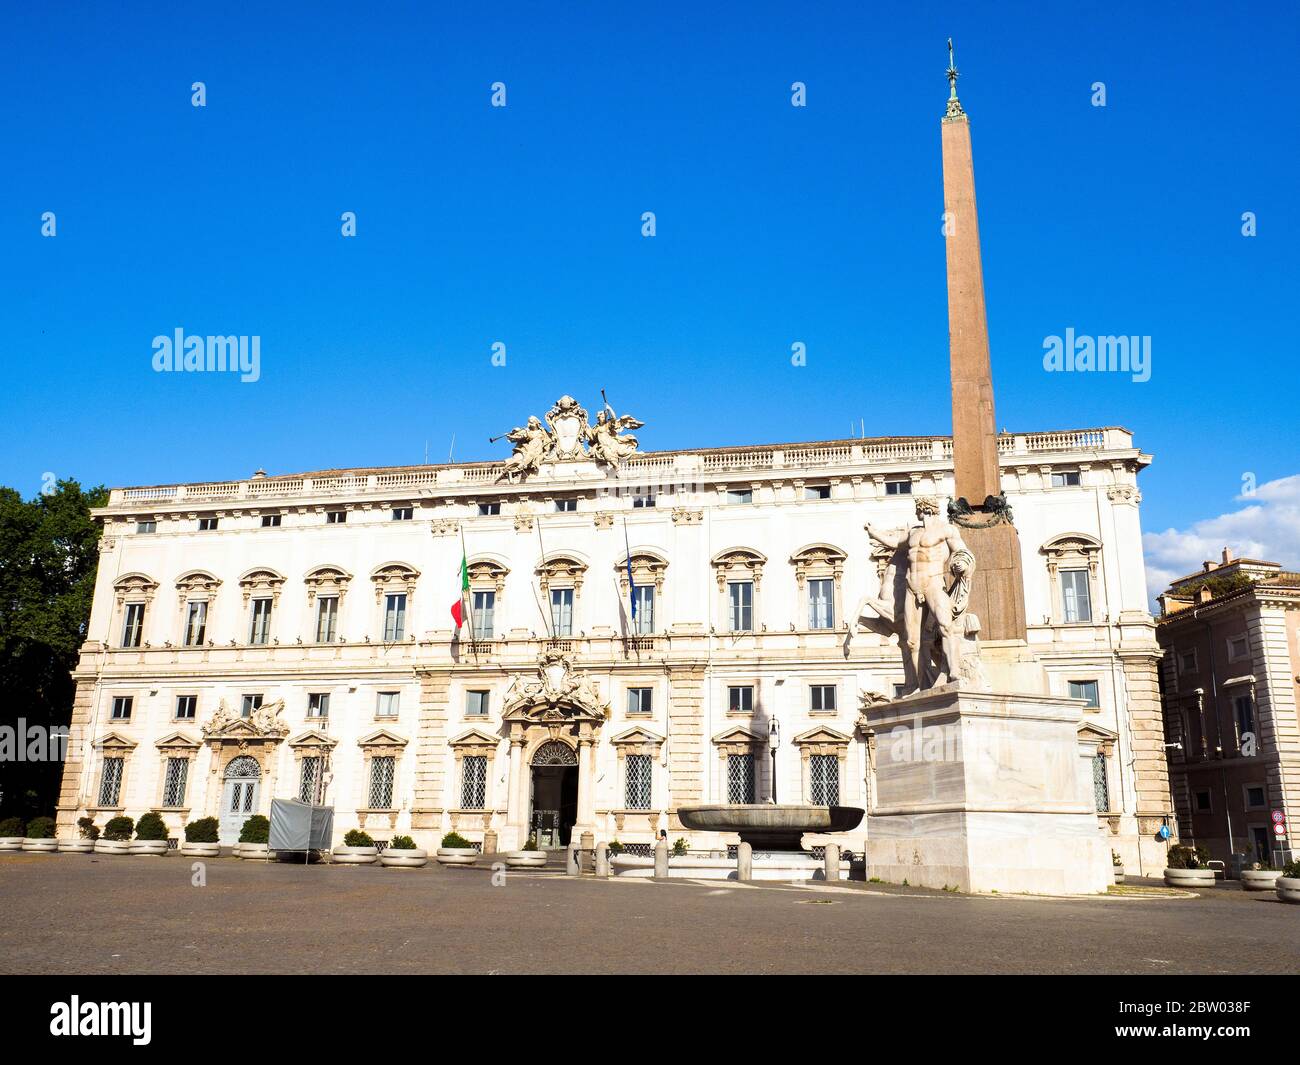 Palazzo della Consulta (built 1732-1735) is a late Baroque palace in central Rome, Italy, that since 1955 houses the Constitutional Court of the Italian Republic. It sits across Piazza del Quirinale from the official residence of the President of the Italian Republic, the Quirinal Palace Stock Photo